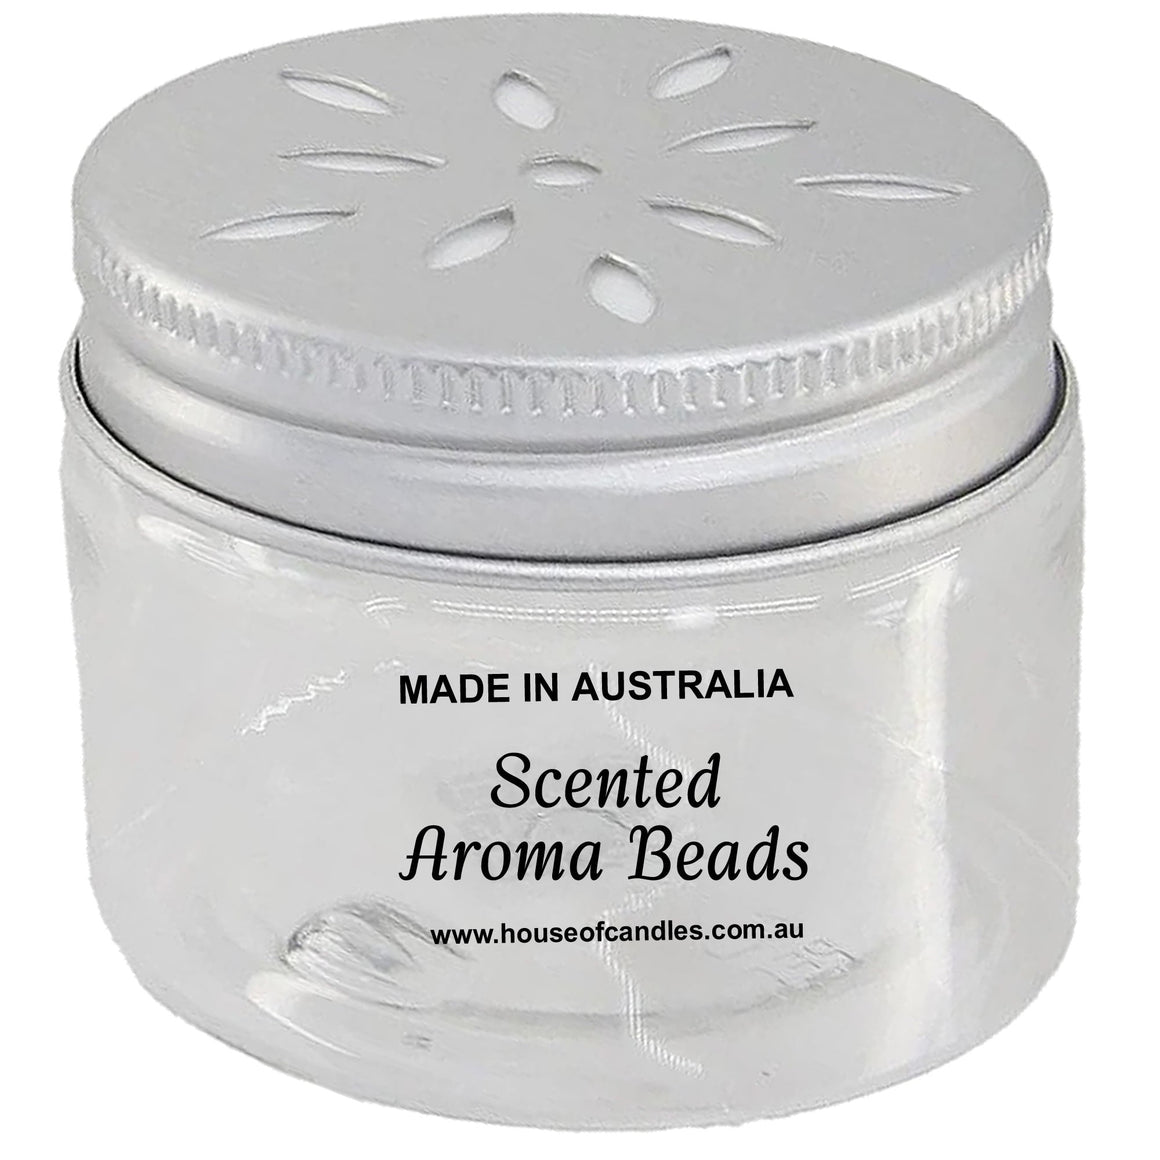 Moroccan Spice Scented Aroma Beads Room/Car Air Freshener